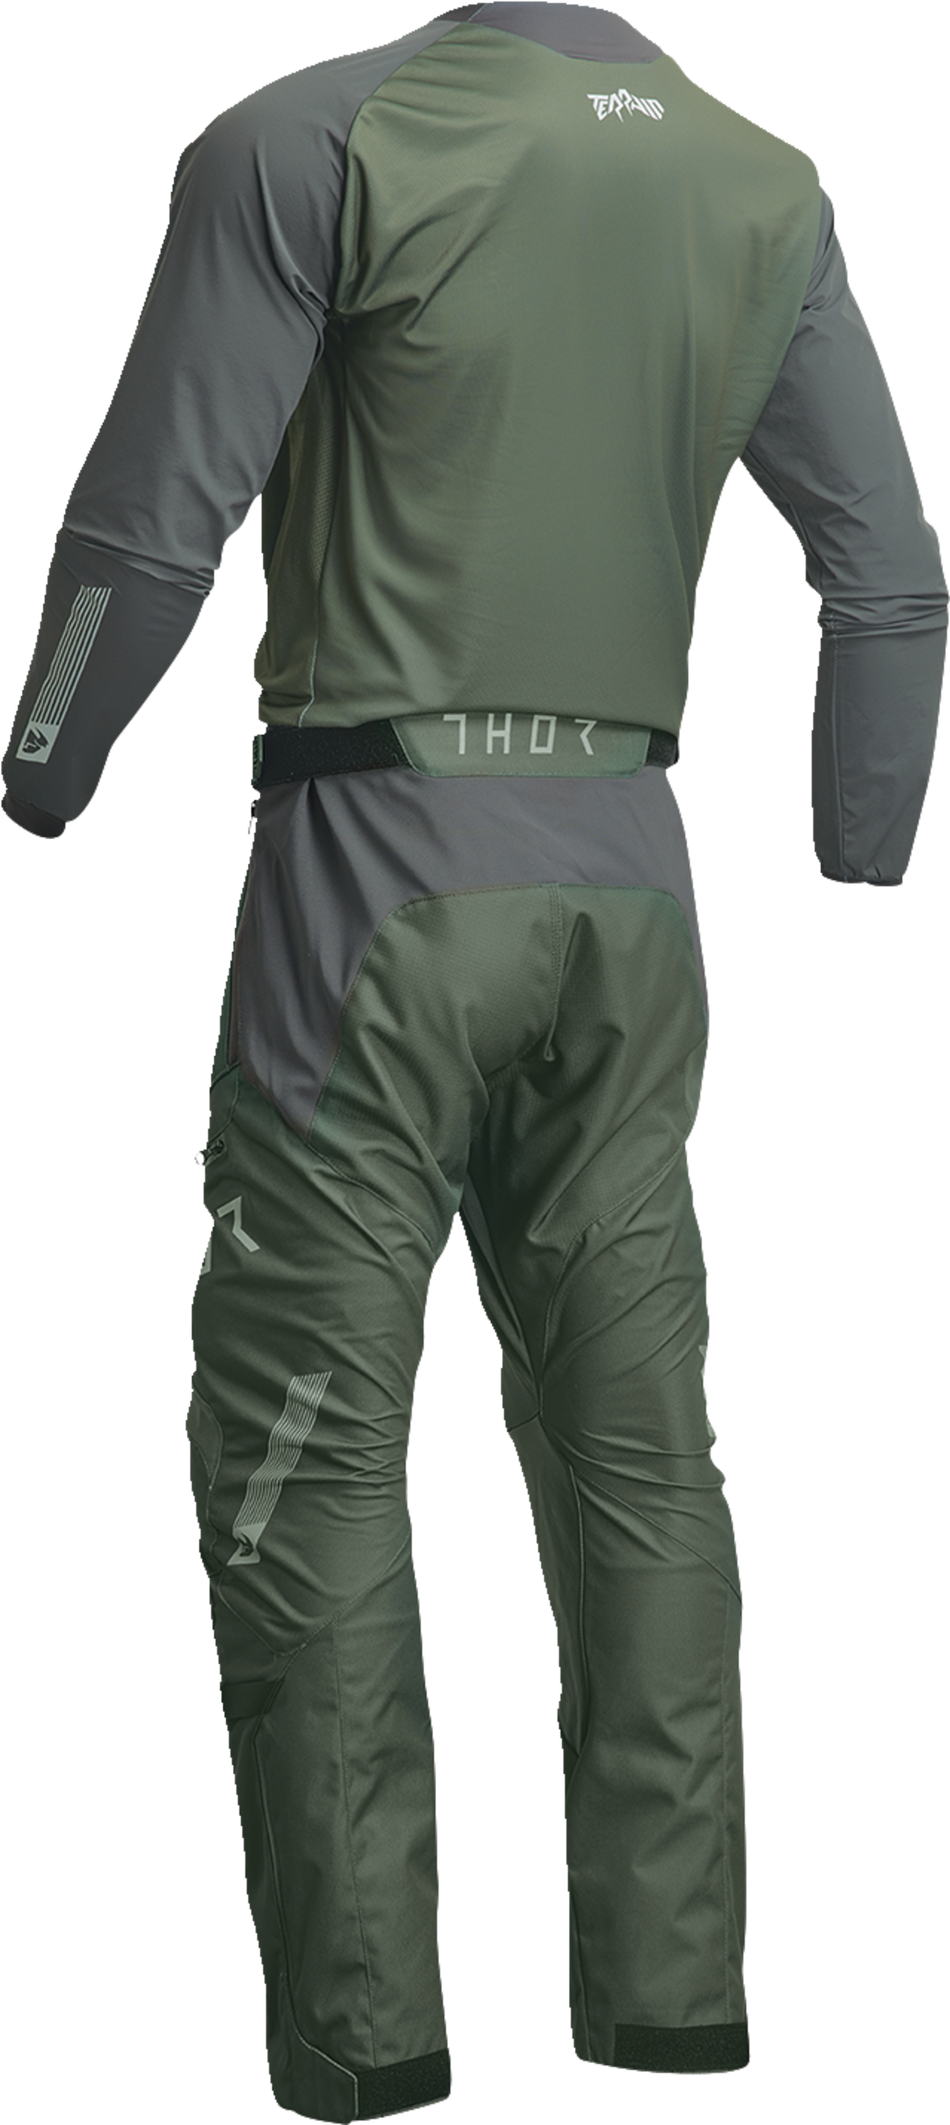 THOR Terrain Jersey - Army/Charcoal - Large 2910-7168